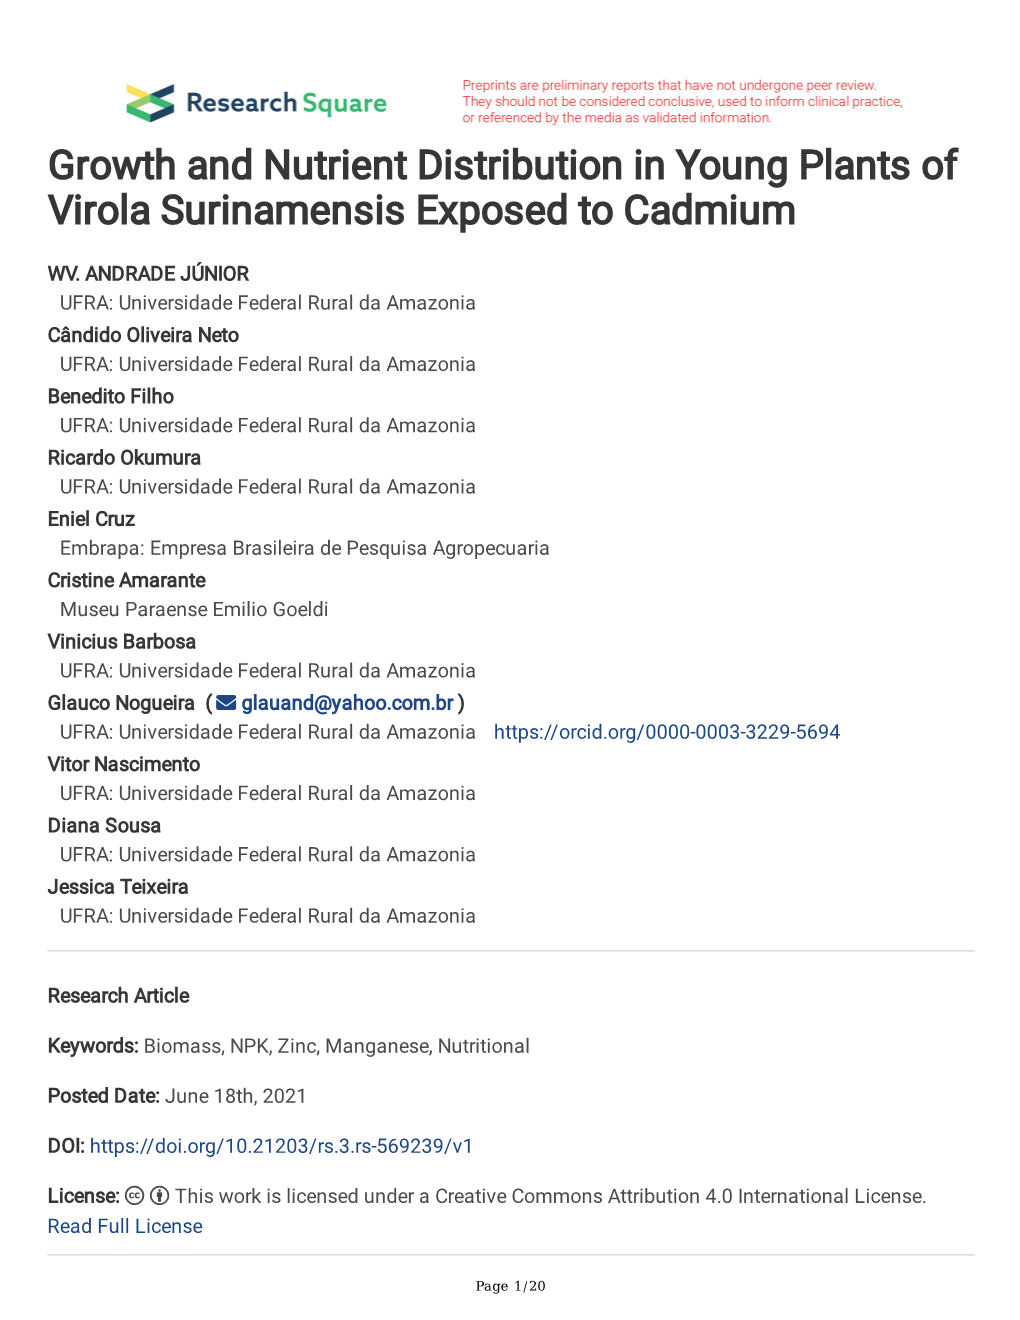 Growth and Nutrient Distribution in Young Plants of Virola Surinamensis Exposed to Cadmium